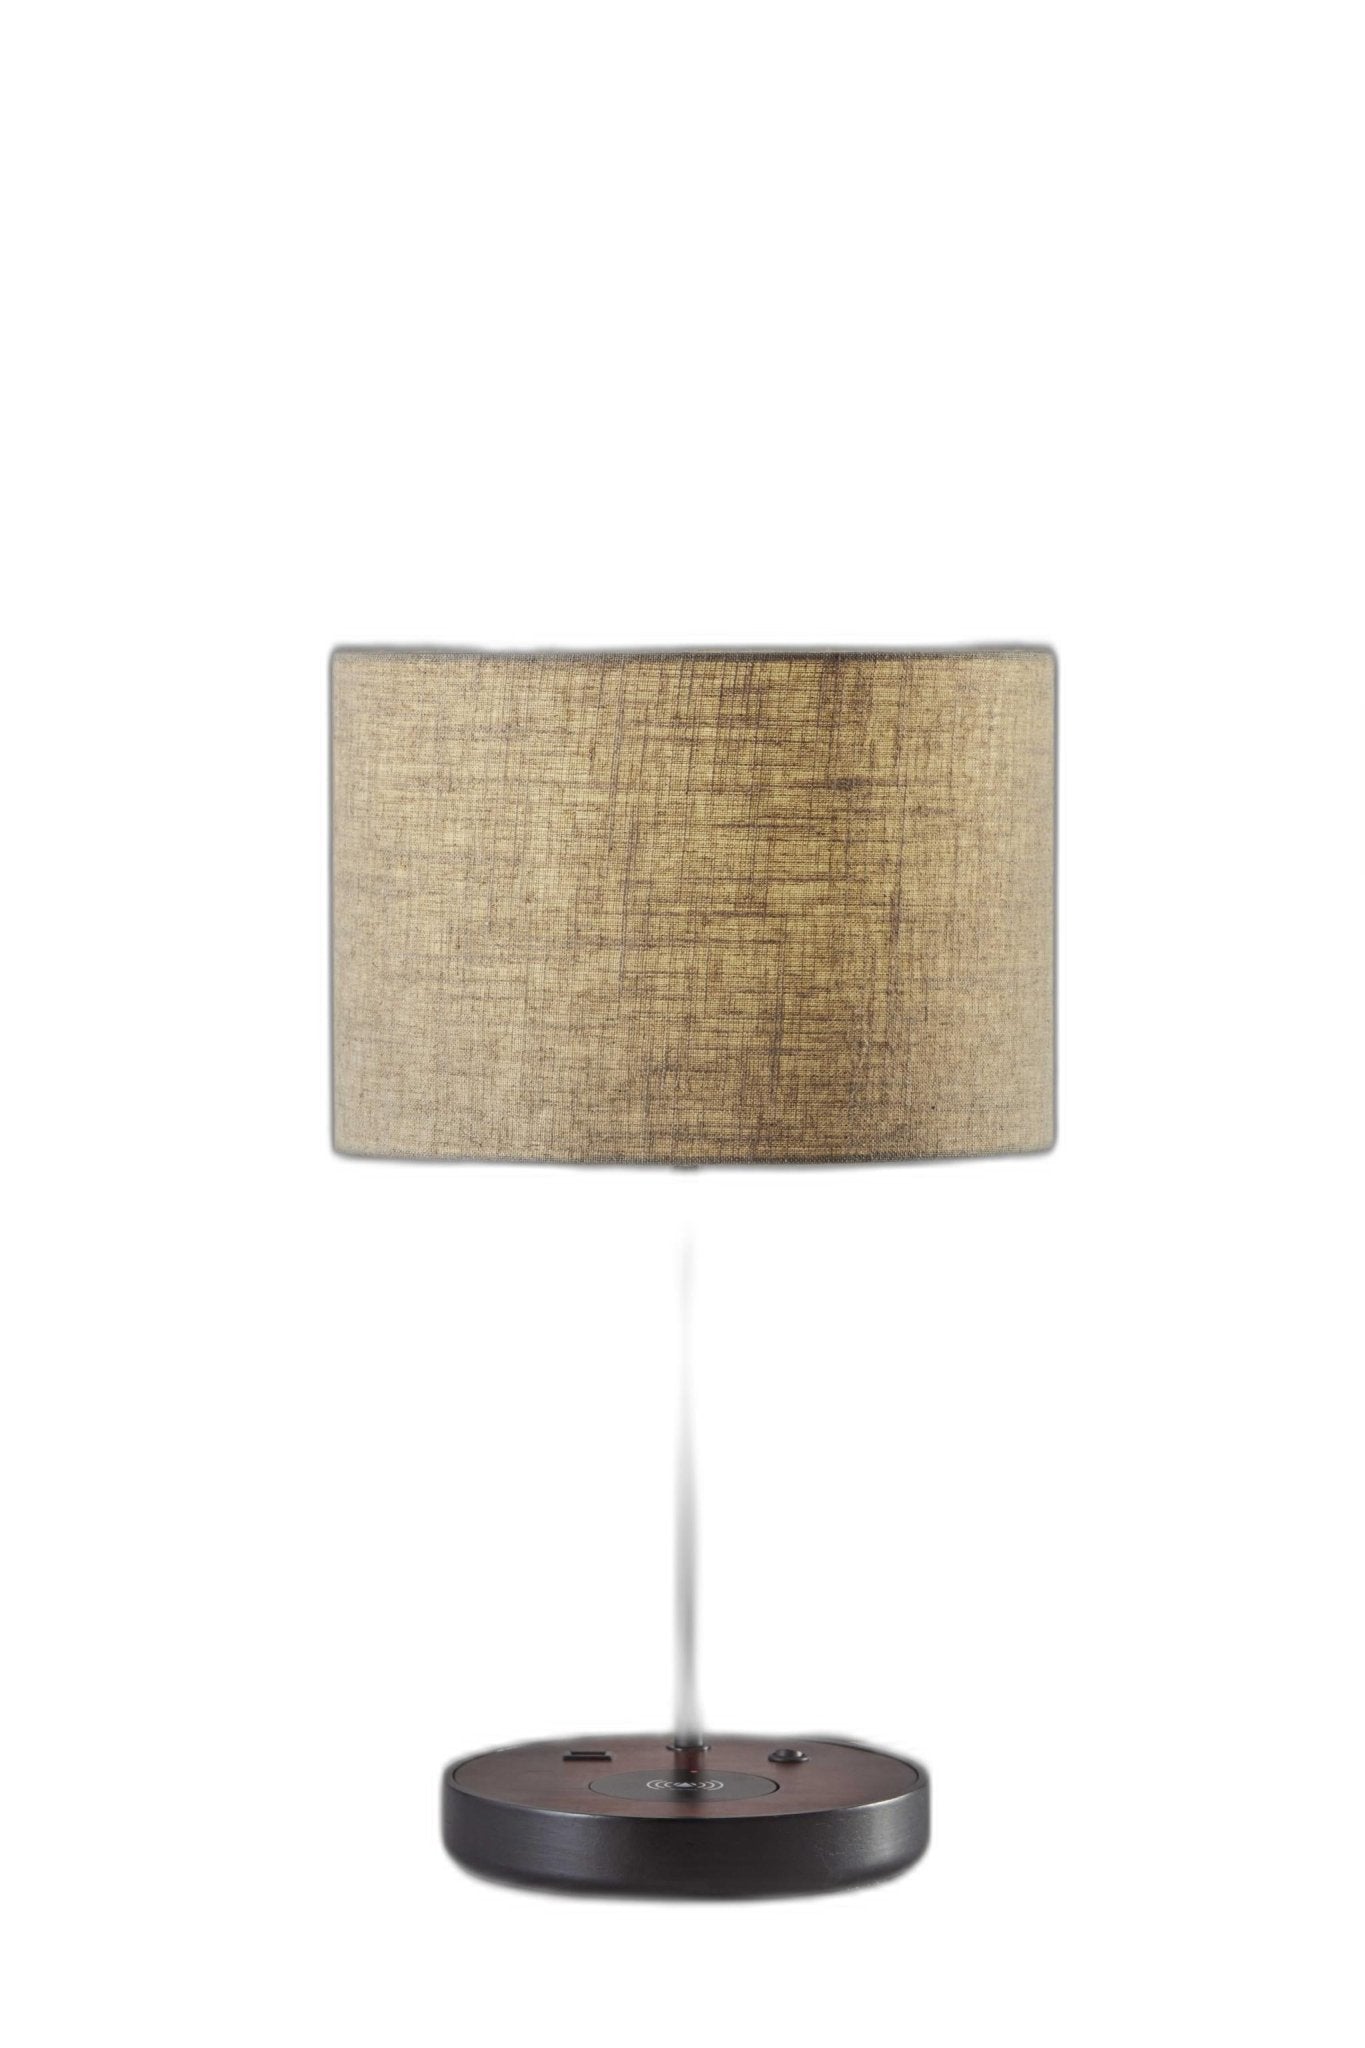 Matte Black Metal Wood Wireless Charging Table Lamp - Tuesday Morning-Table Lamps